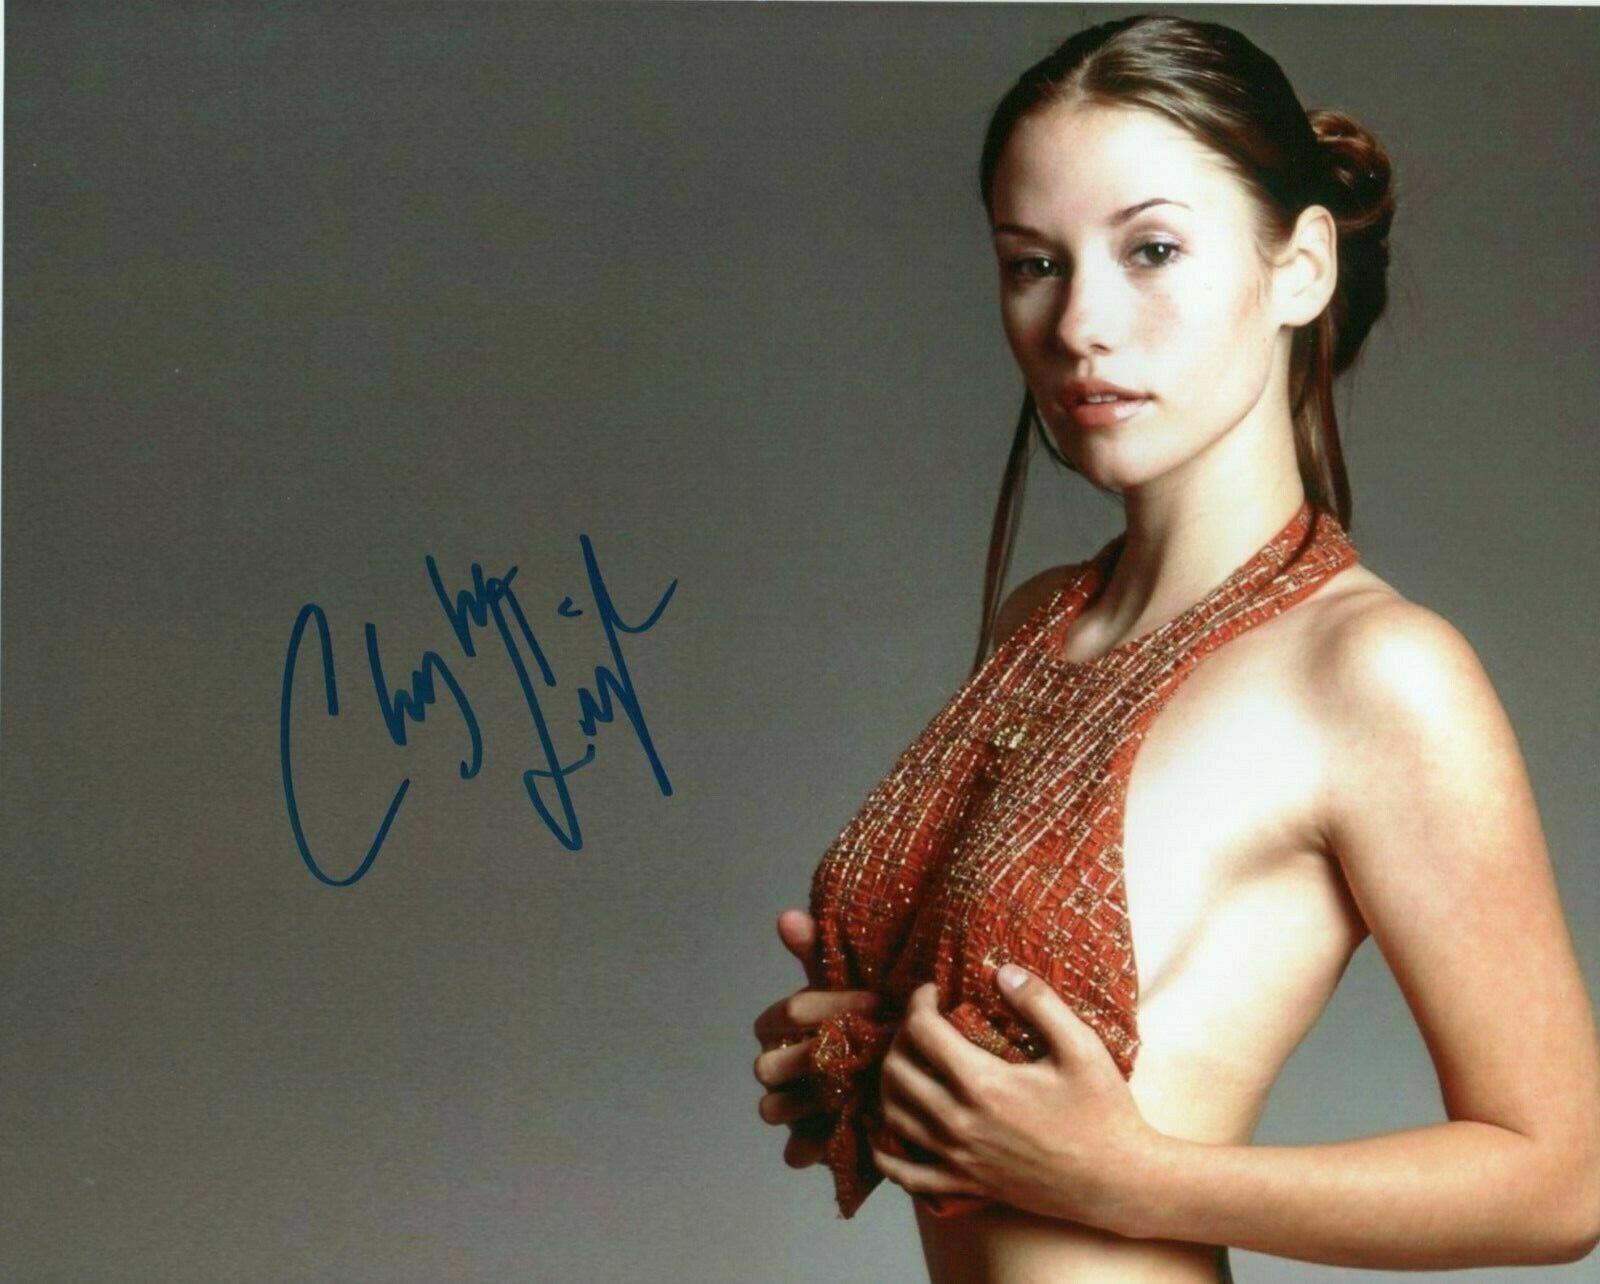 Best of Chyler leigh sexy pics